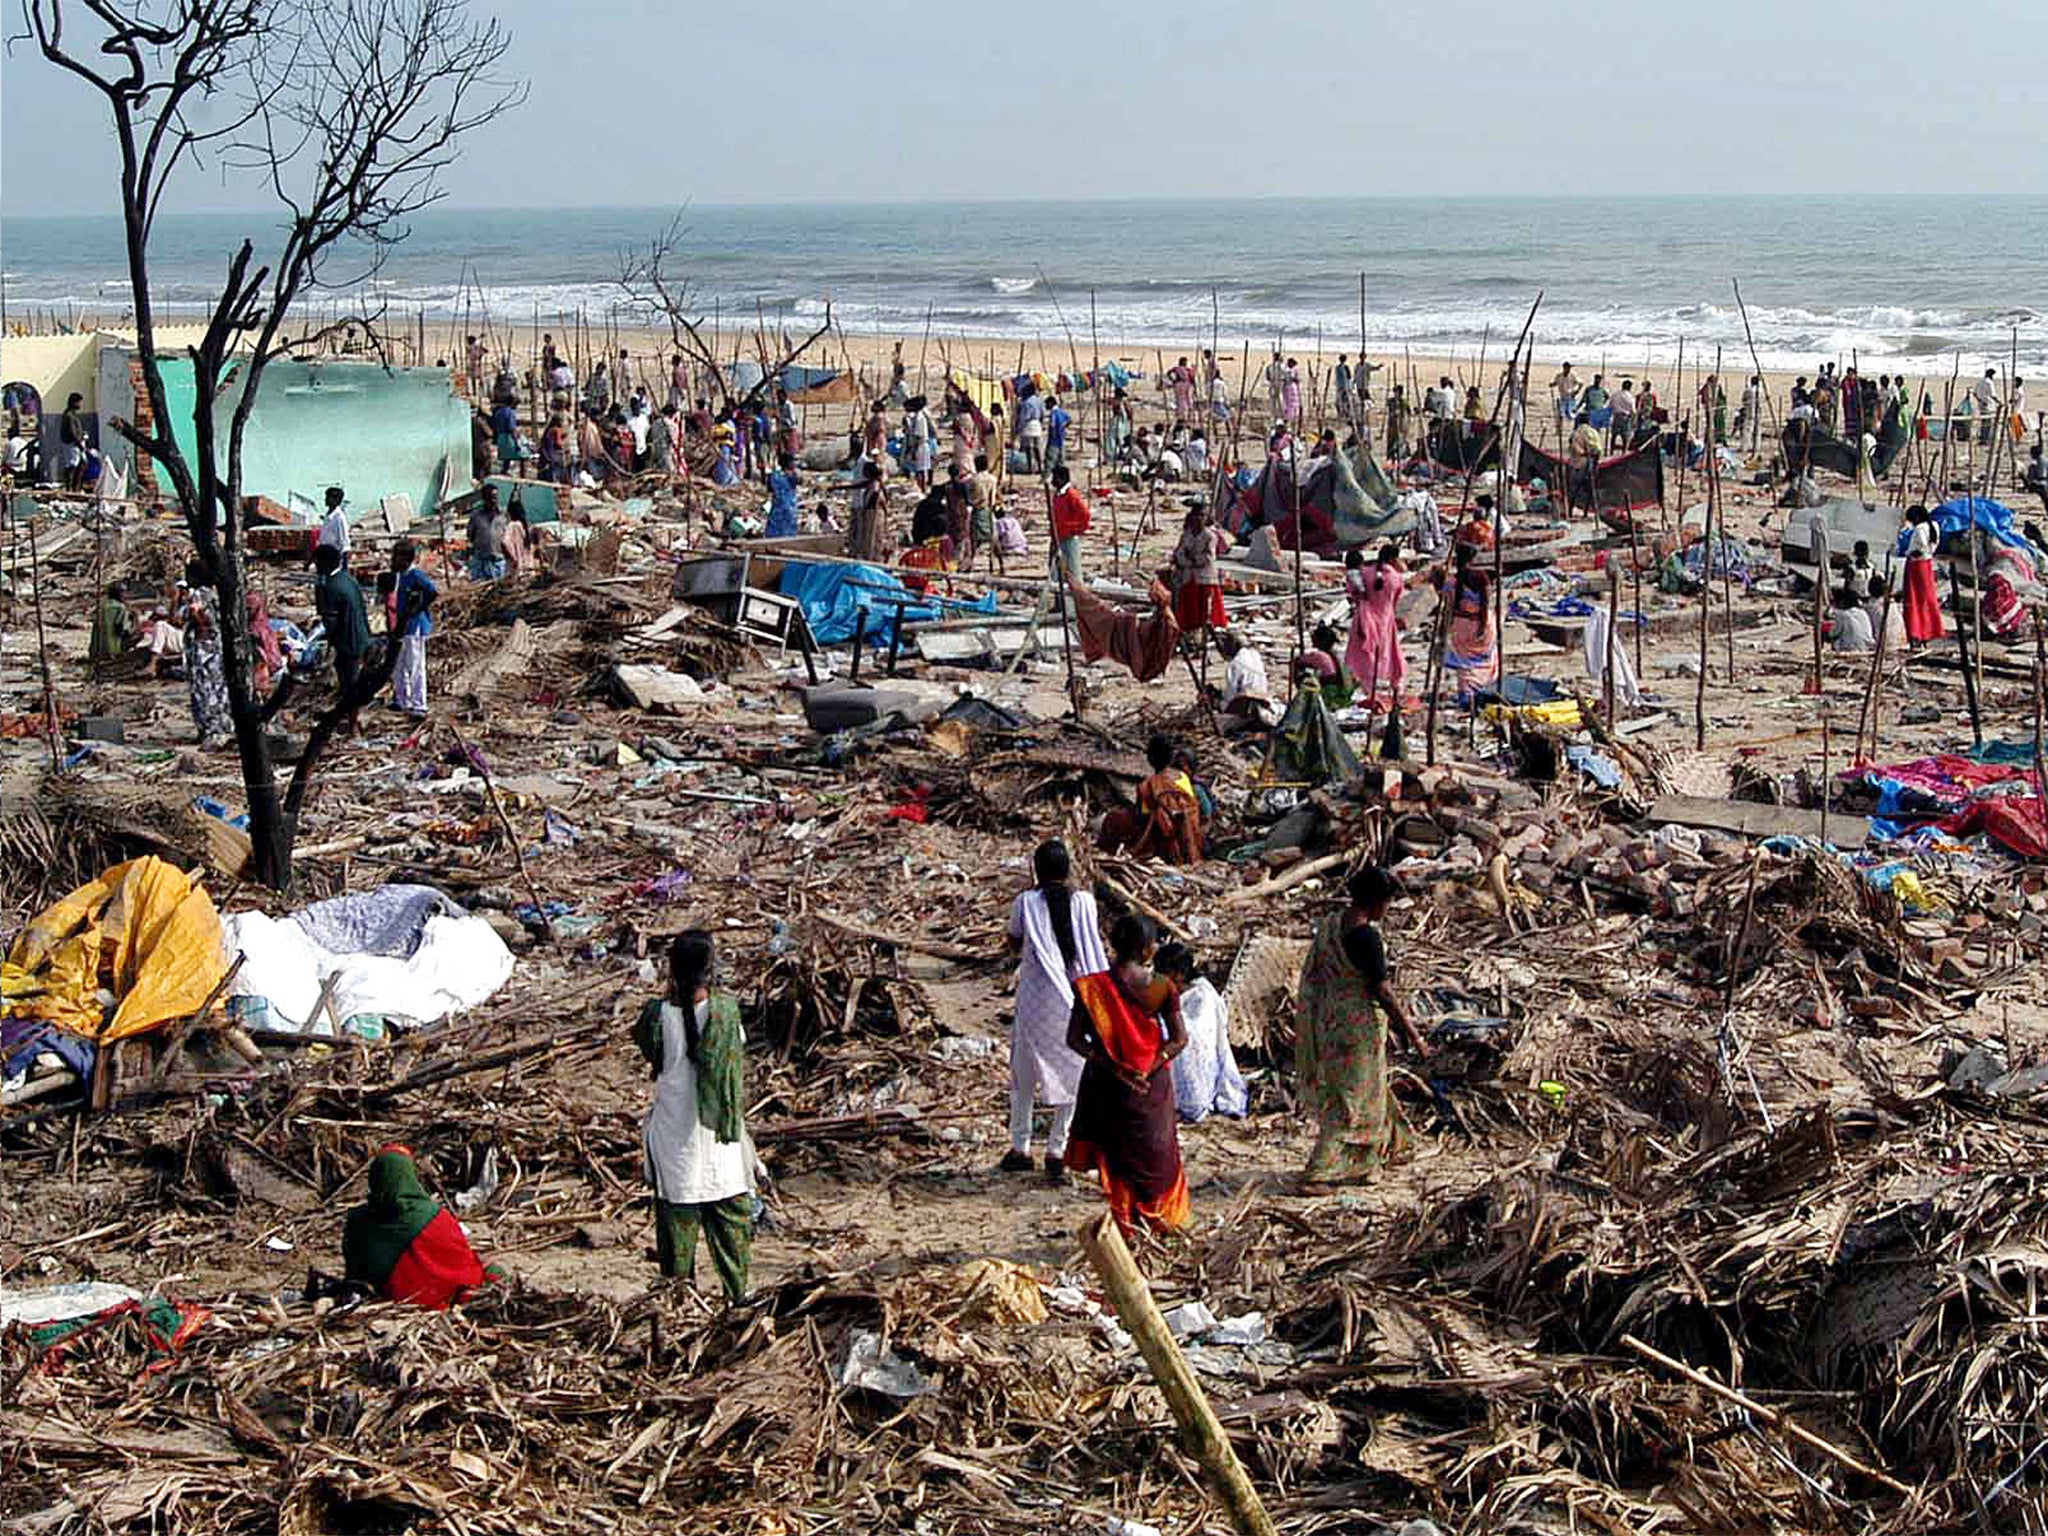 Research found an increase in birth rates after the tsunami